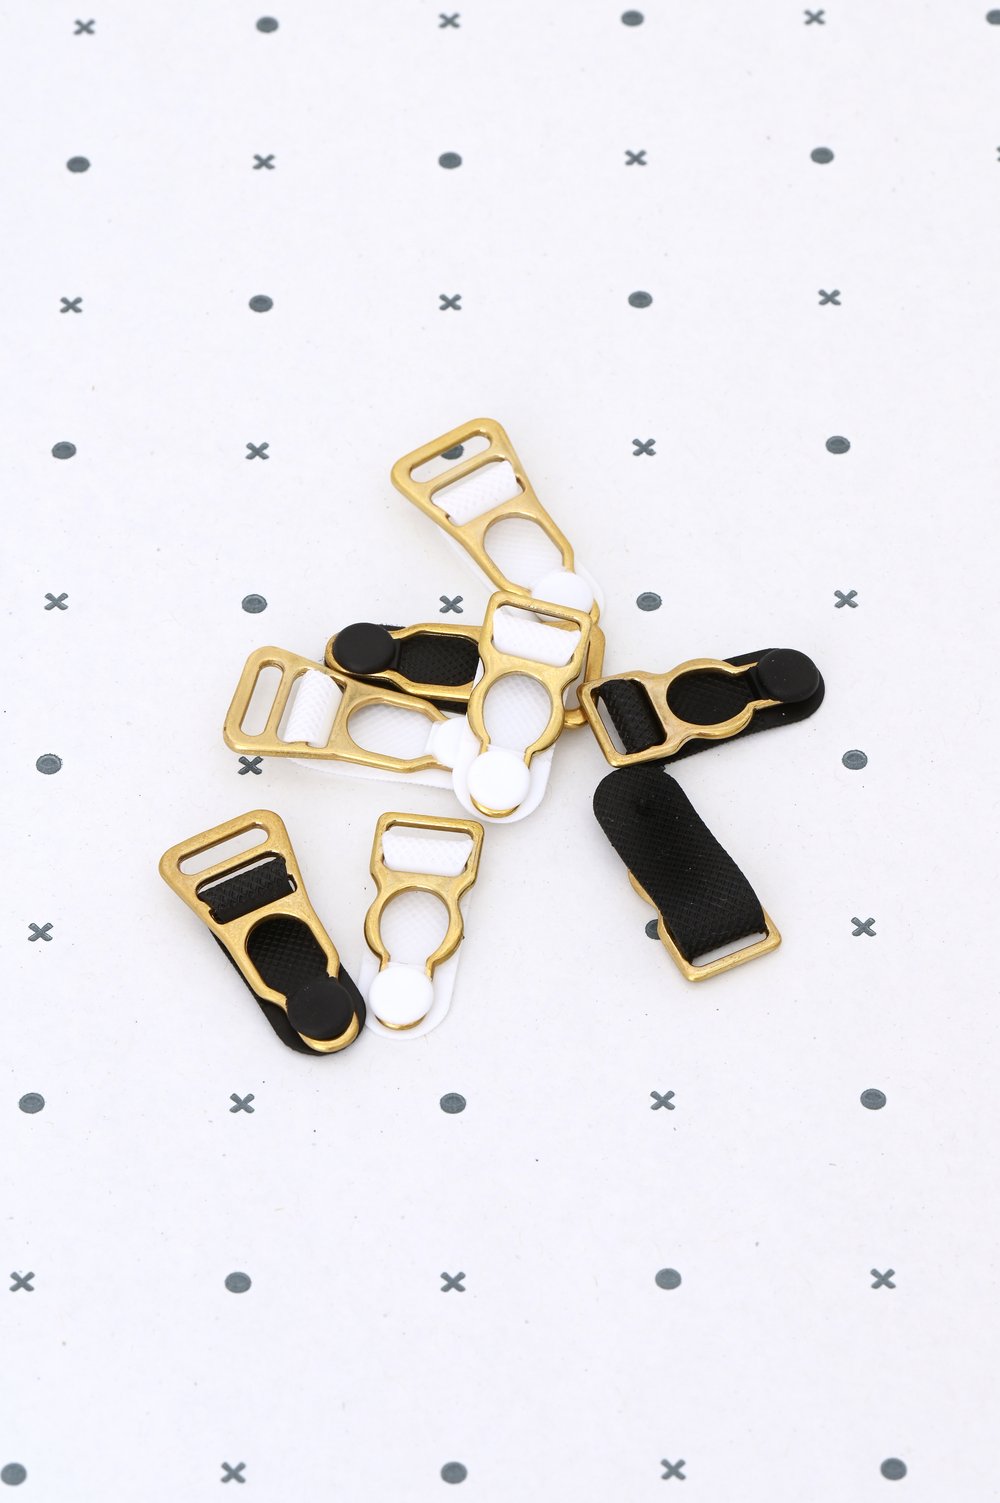 Suspender Clips - 10mm (3/8 Inch) or 12mm (1/2 Inch) — Contour Atelier